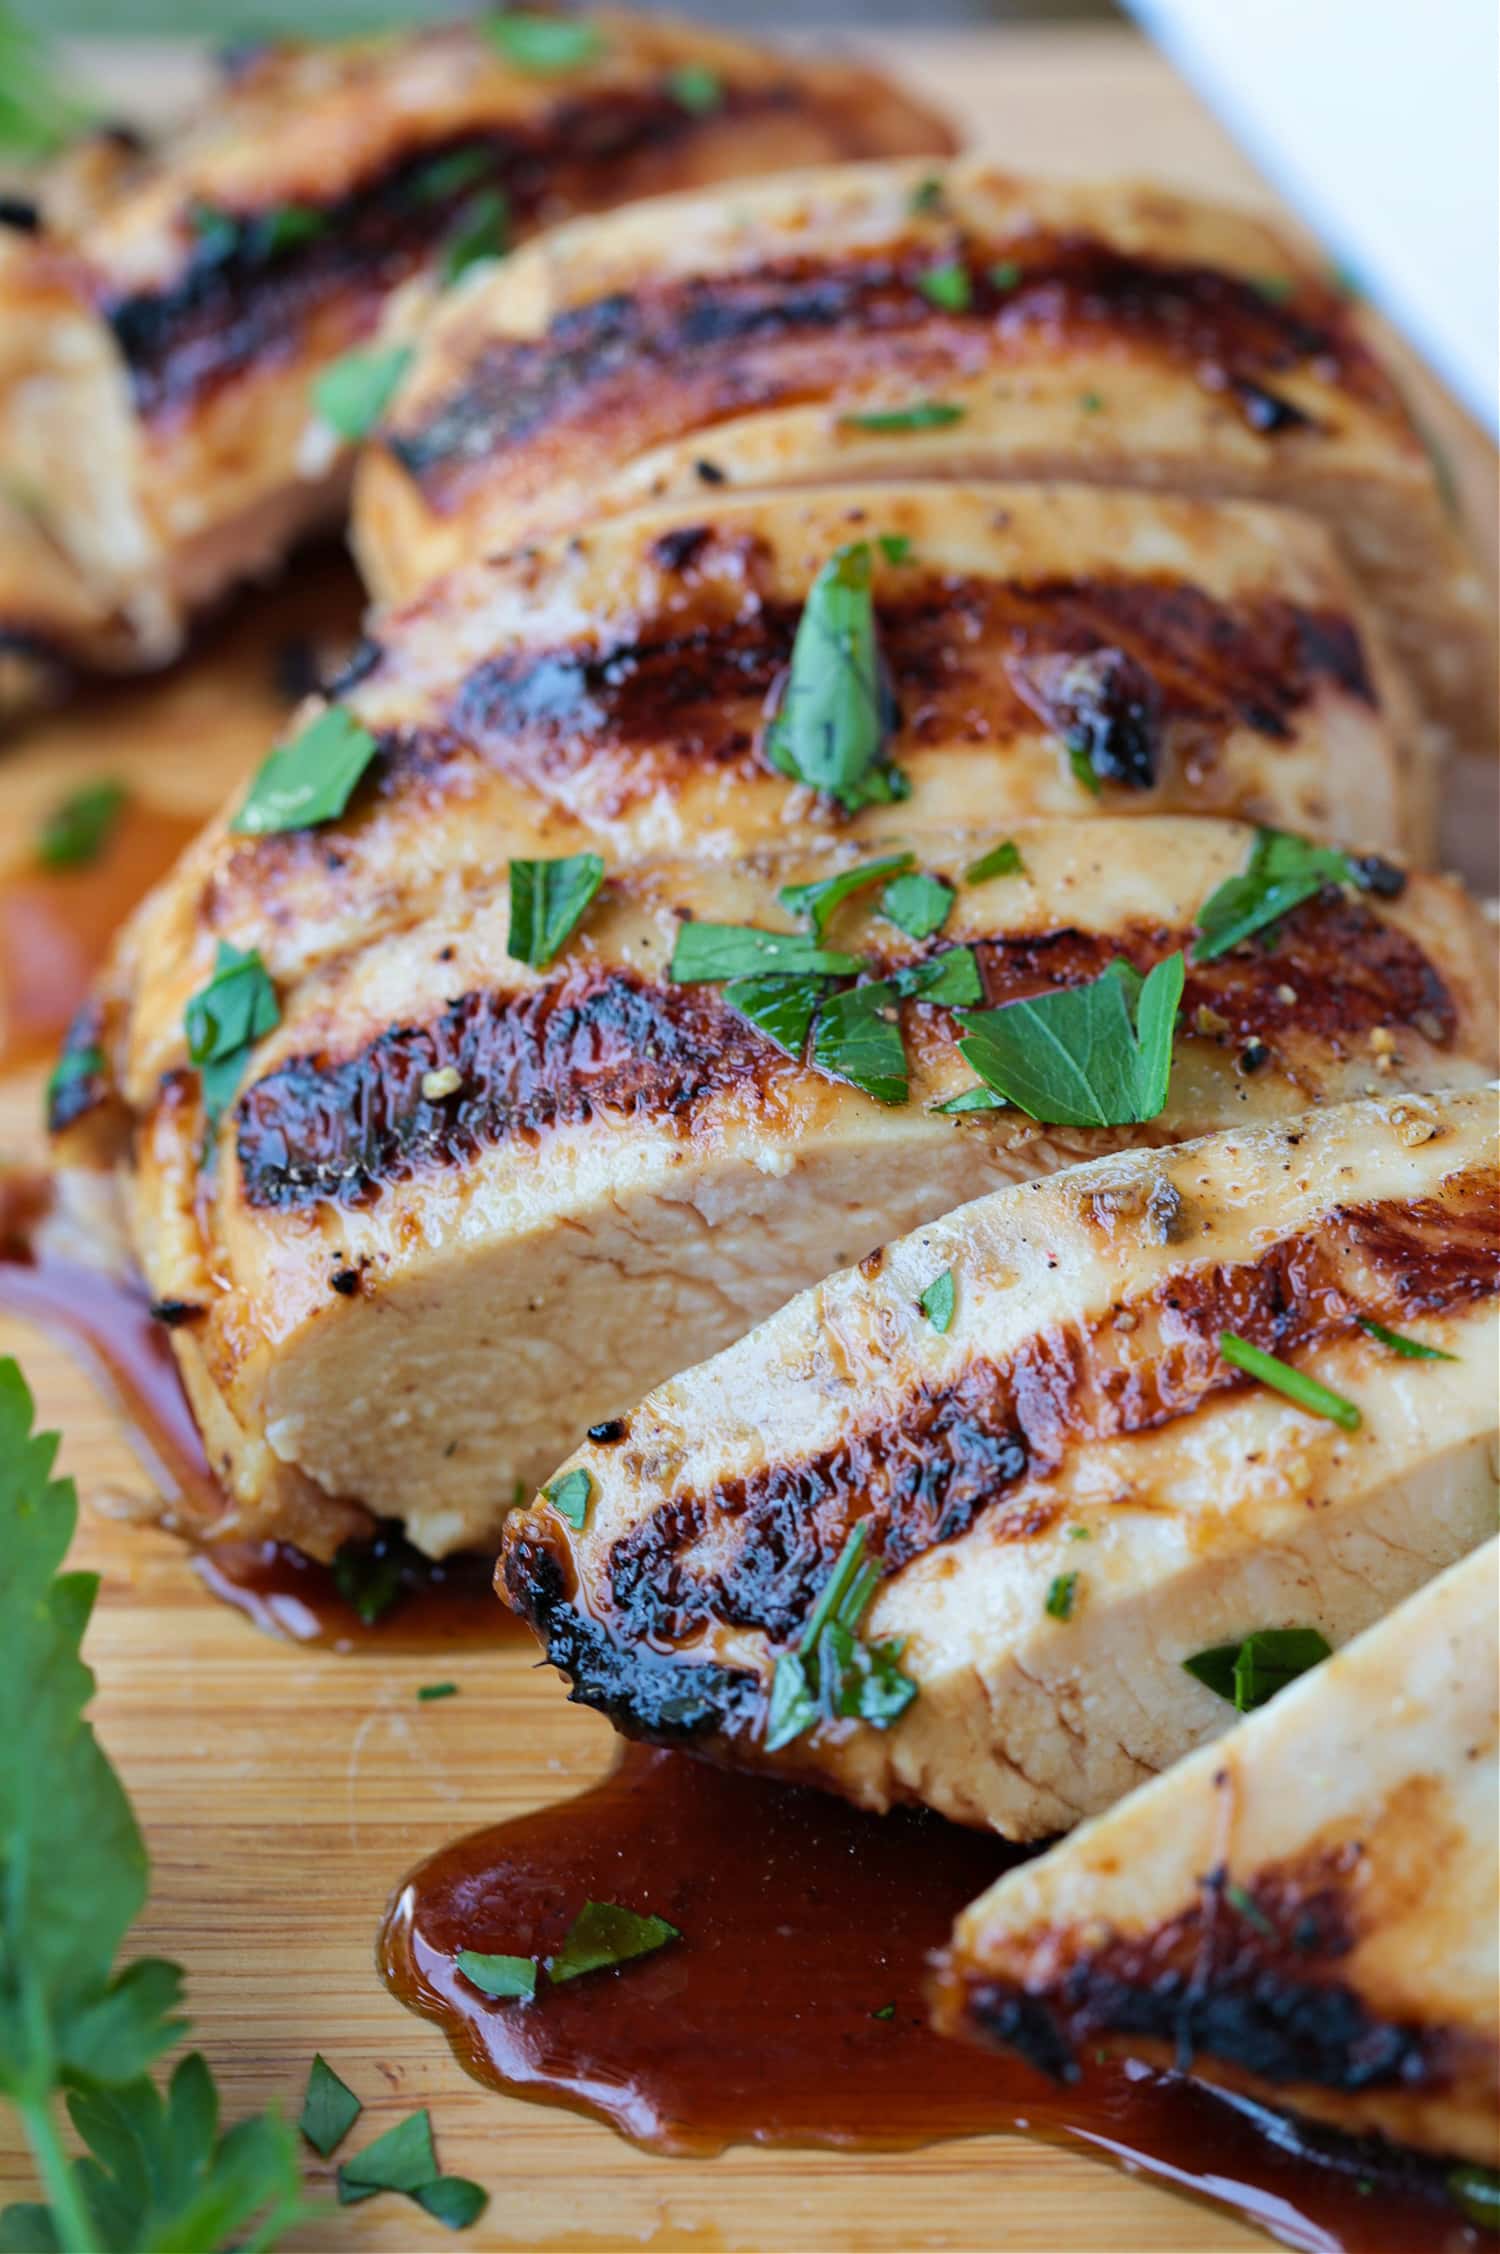 sliced, grilled chicken breast on board with juice